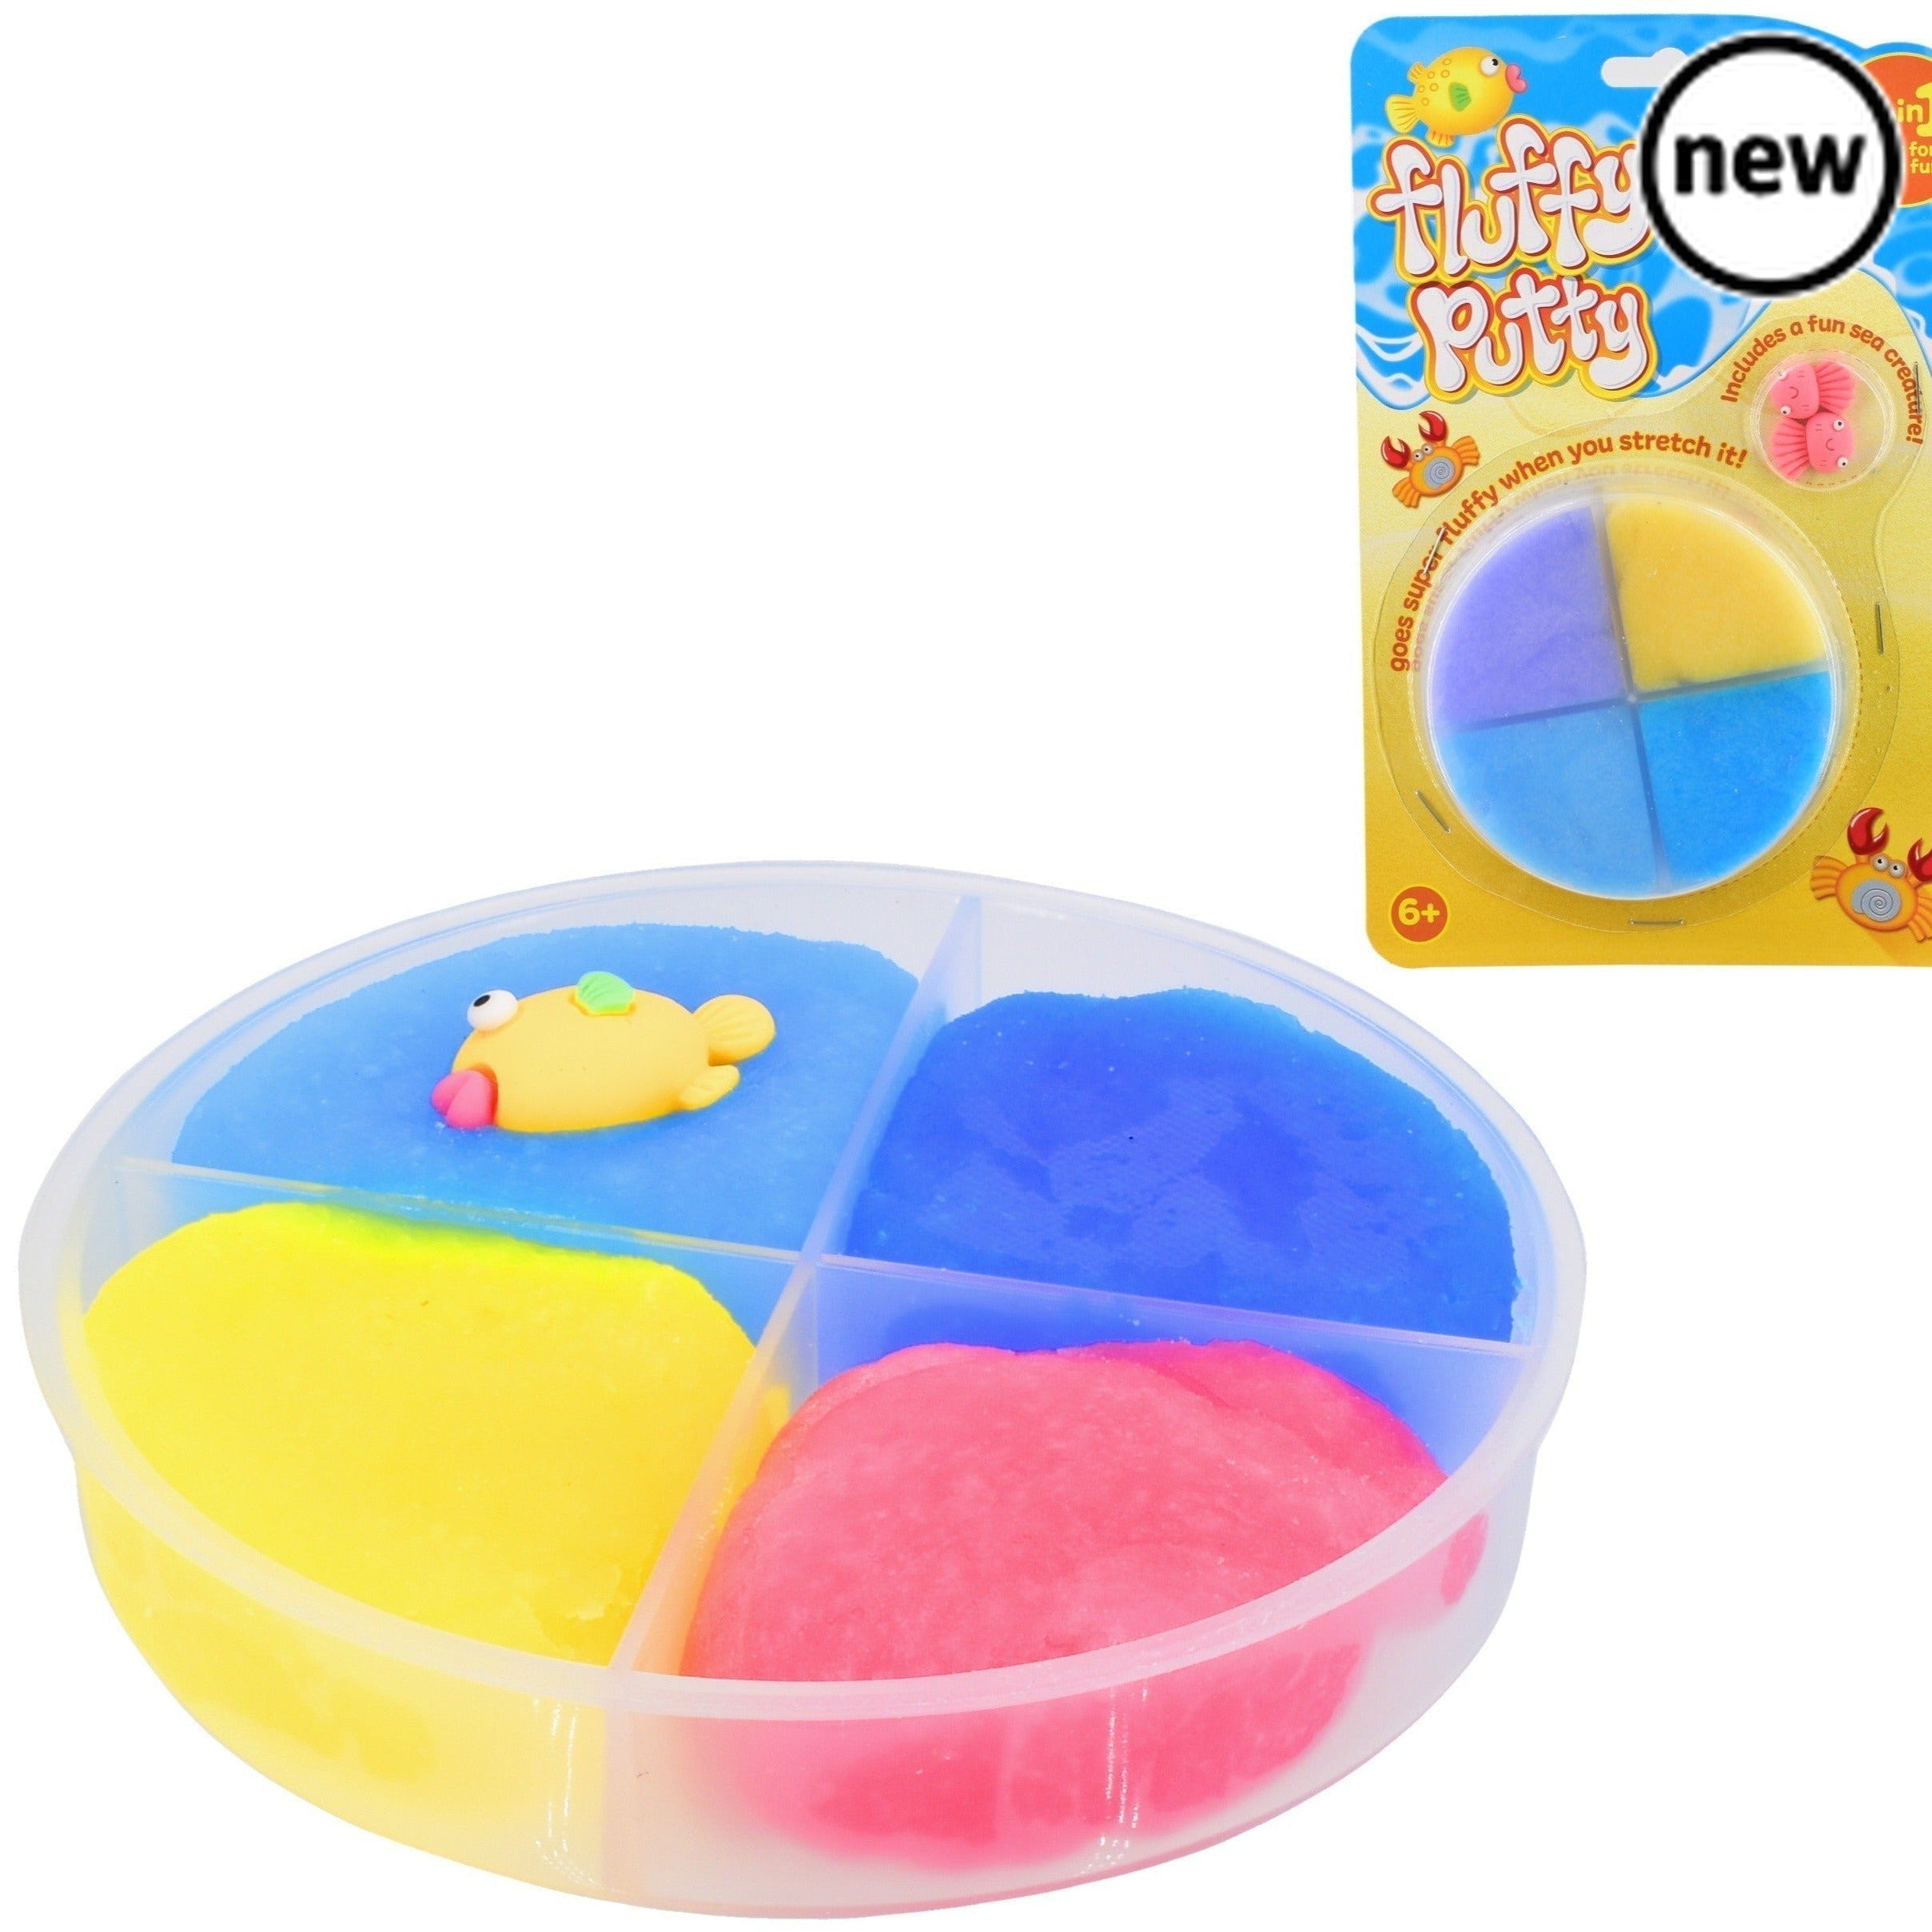 Soft & Fluffy Putty 100g, Introducing our exciting, new Fluffy Putty! This soft, stretchy putty will keep your fingers busy for hours and is perfect for anyone who struggles with anxiety or fidgeting behaviours. With three different sea creatures to collect - fish, crab, and octopus - this putty is ideal for anyone who loves marine life. The putty's super stretchy texture will allow you to squish and squeeze it to your heart's content, providing tactile stimulation for your fingers and hands. As you play wi